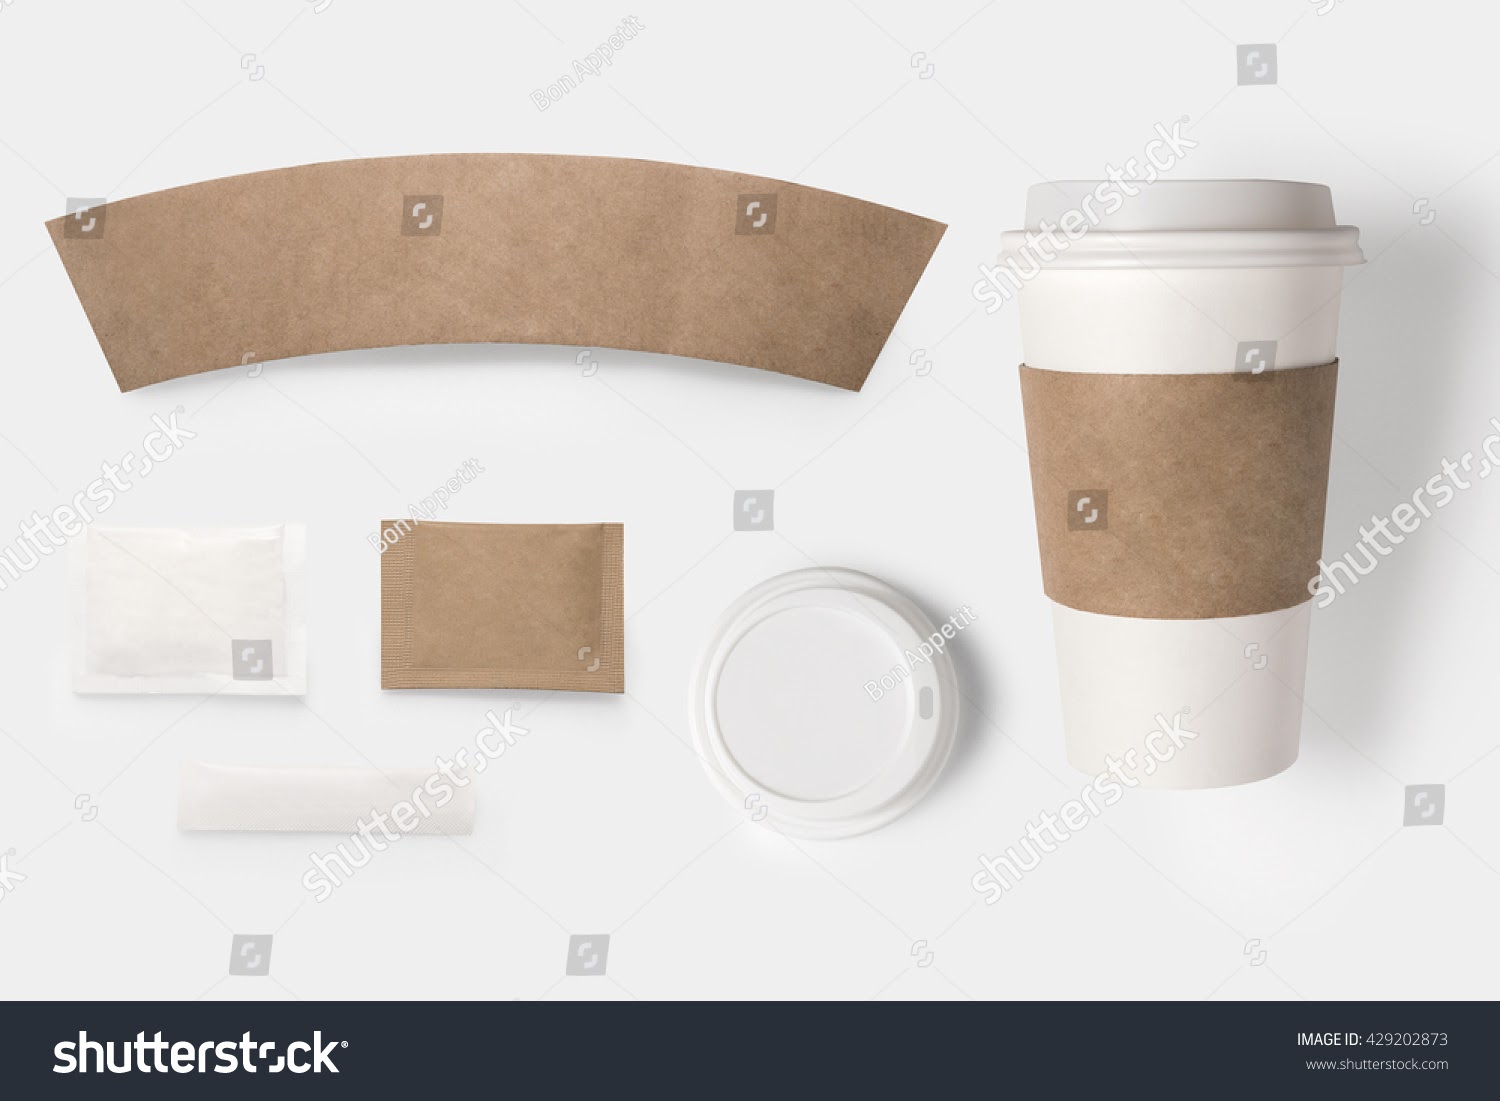 Download Free 6414+ Cup Holder Mockup Yellowimages Mockups these mockups if you need to present your logo and other branding projects.